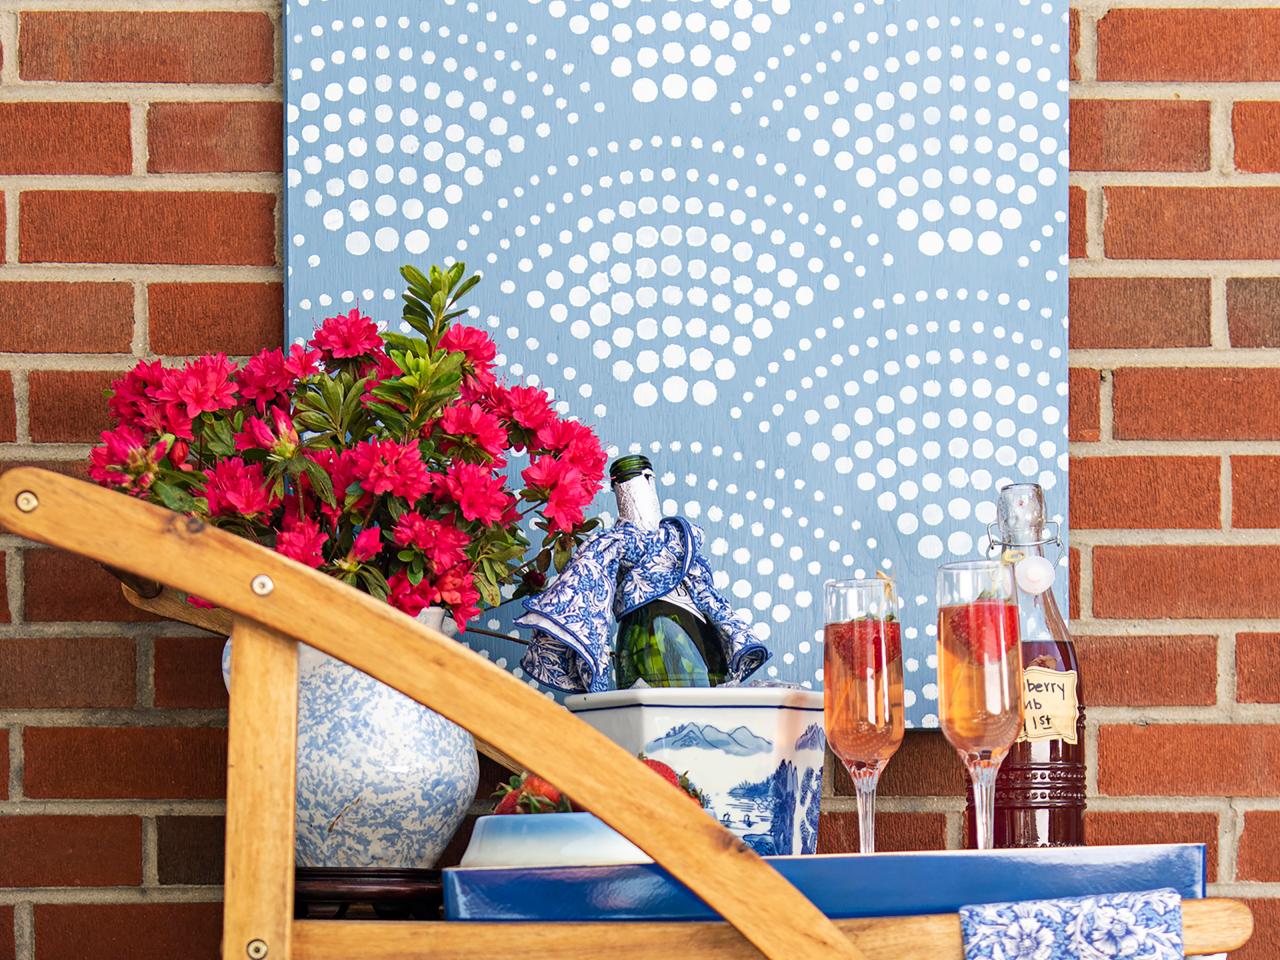 34 Beautiful Porch Wall Decor Ideas to Make Your Outdoor Area More  Welcoming | Outdoor wall decor, Porch wall, Porch wall decor